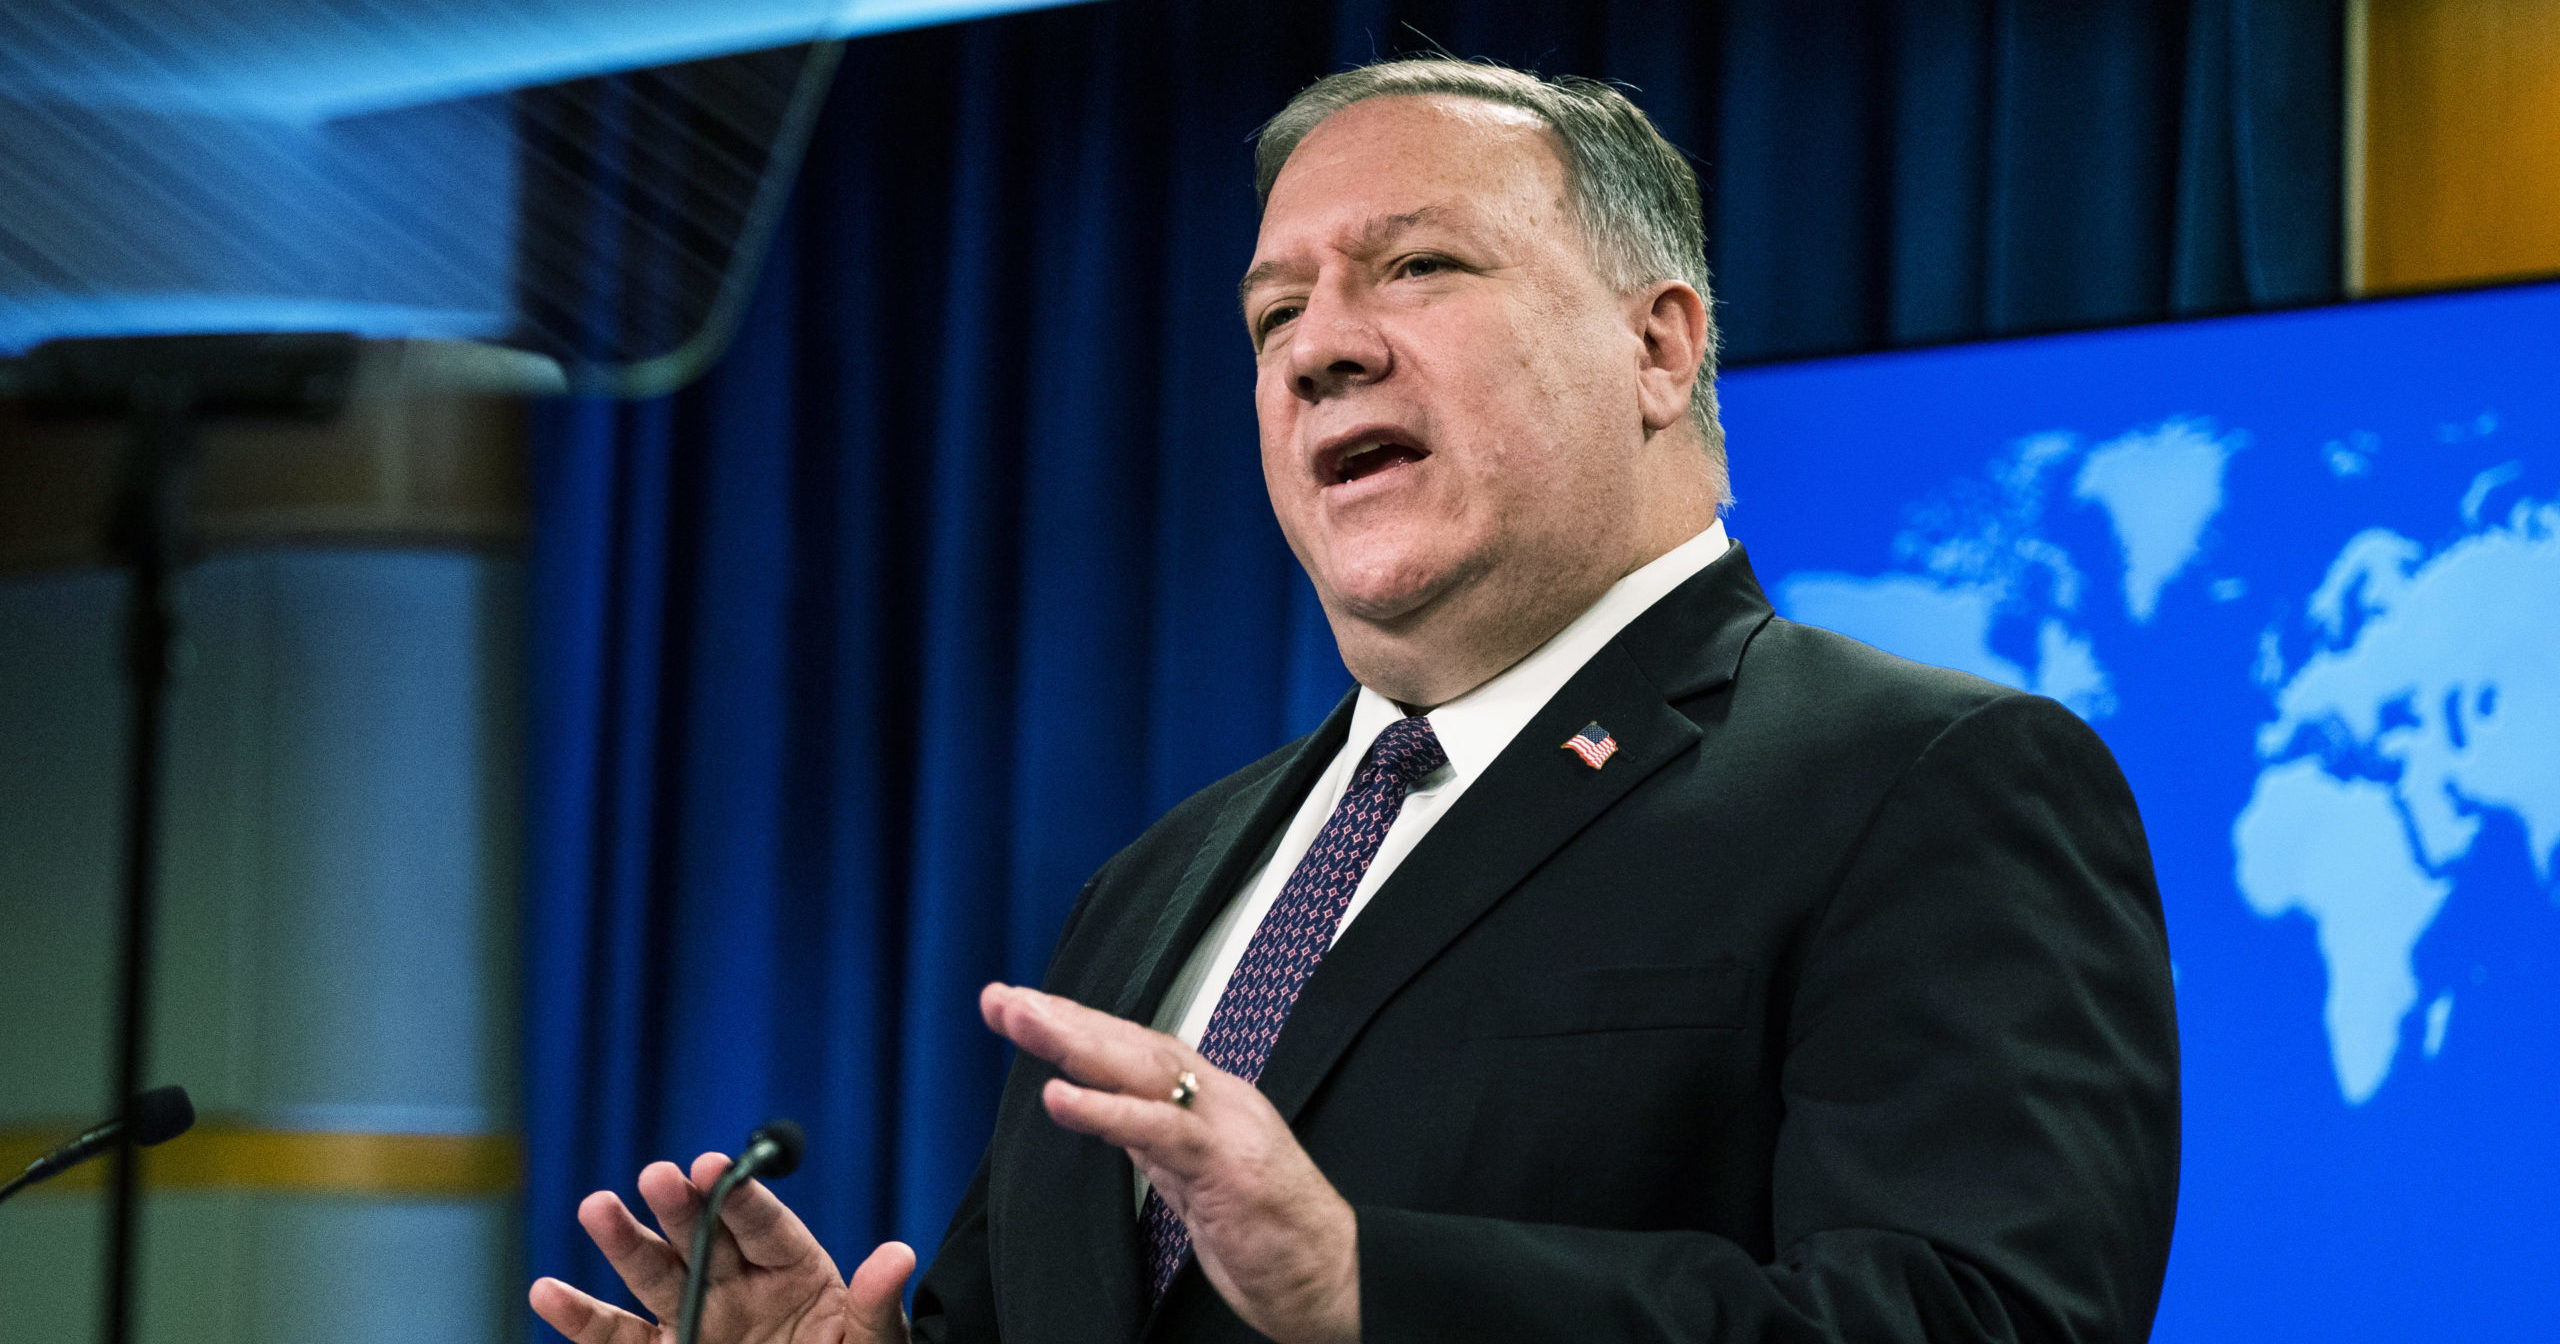 Secretary of State Mike Pompeo speaks during a news conference at the State Department on Oct. 14, 2020, in Washington, D.C.